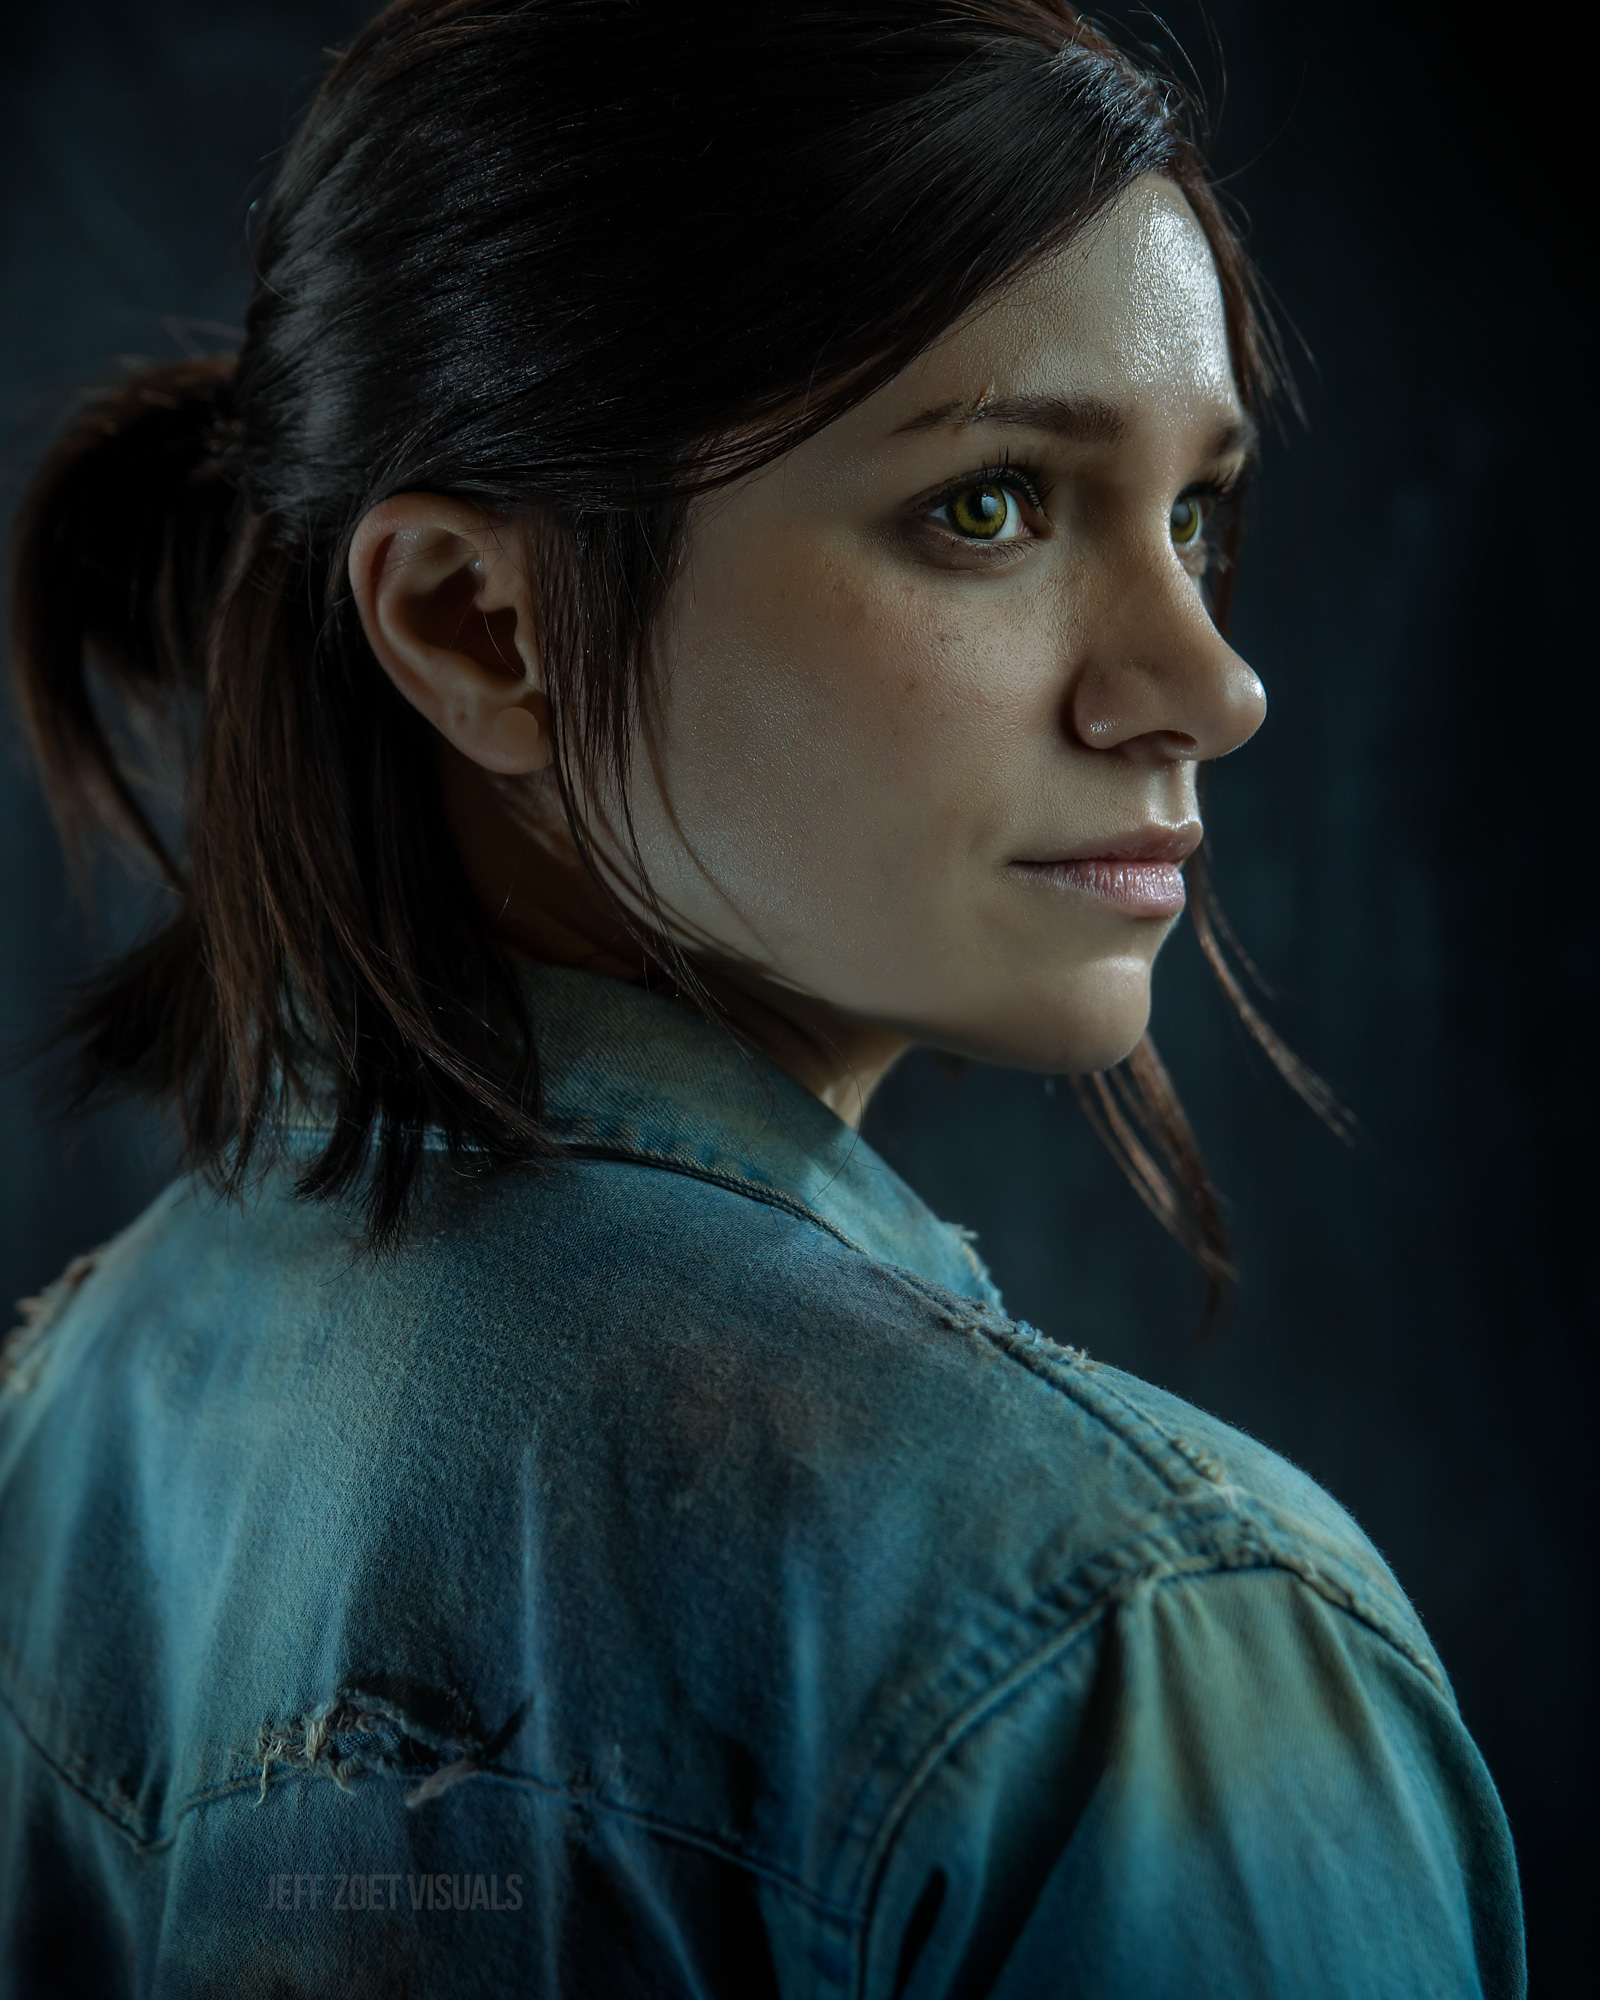 Ellie Williams The Last of Us Cosplay by AnnieGraves on DeviantArt